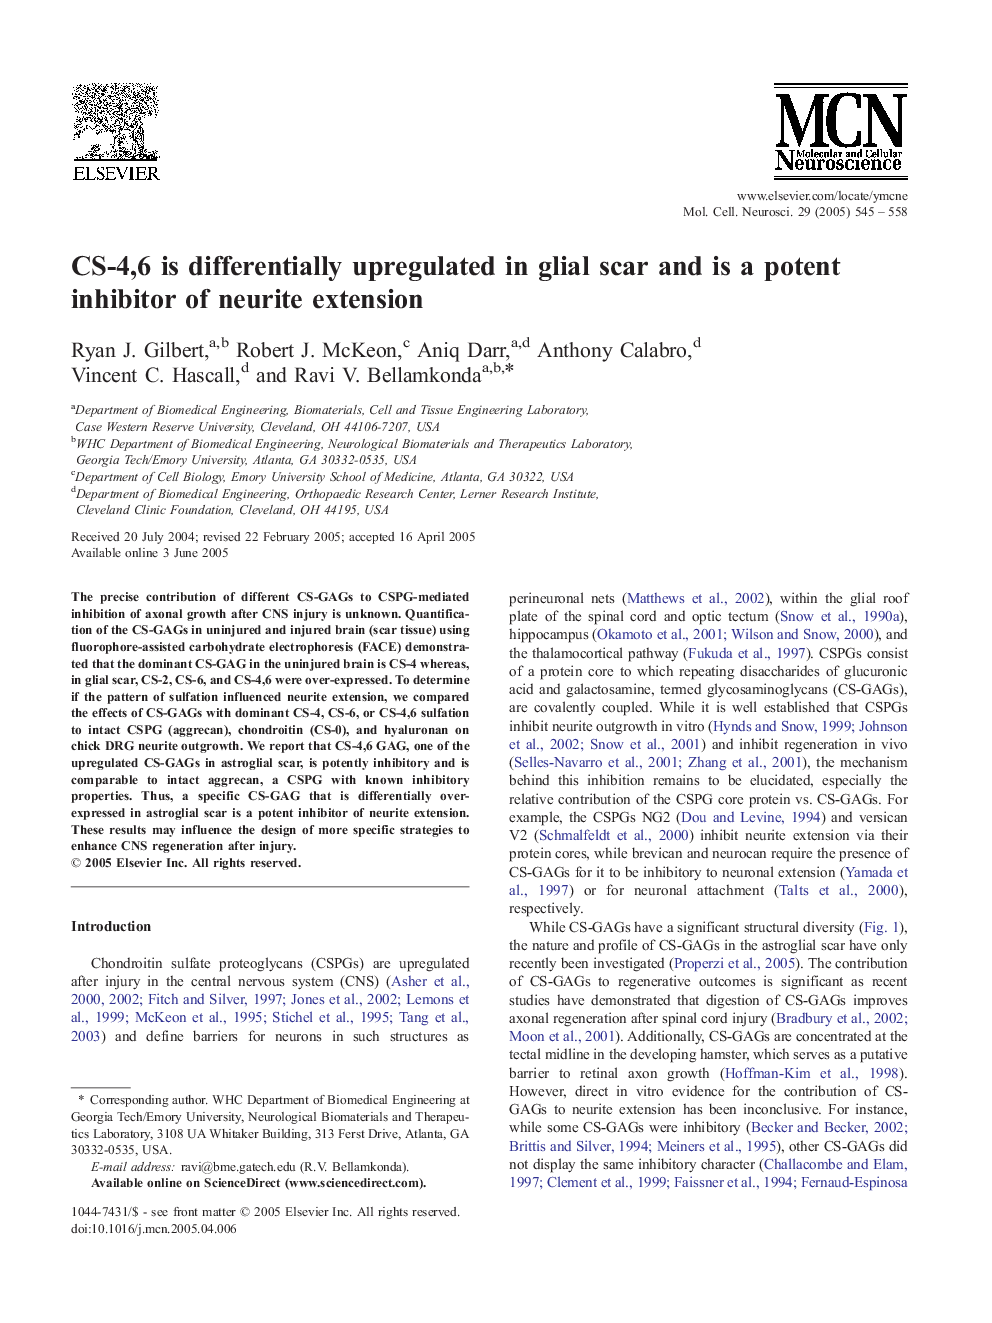 CS-4,6 is differentially upregulated in glial scar and is a potent inhibitor of neurite extension